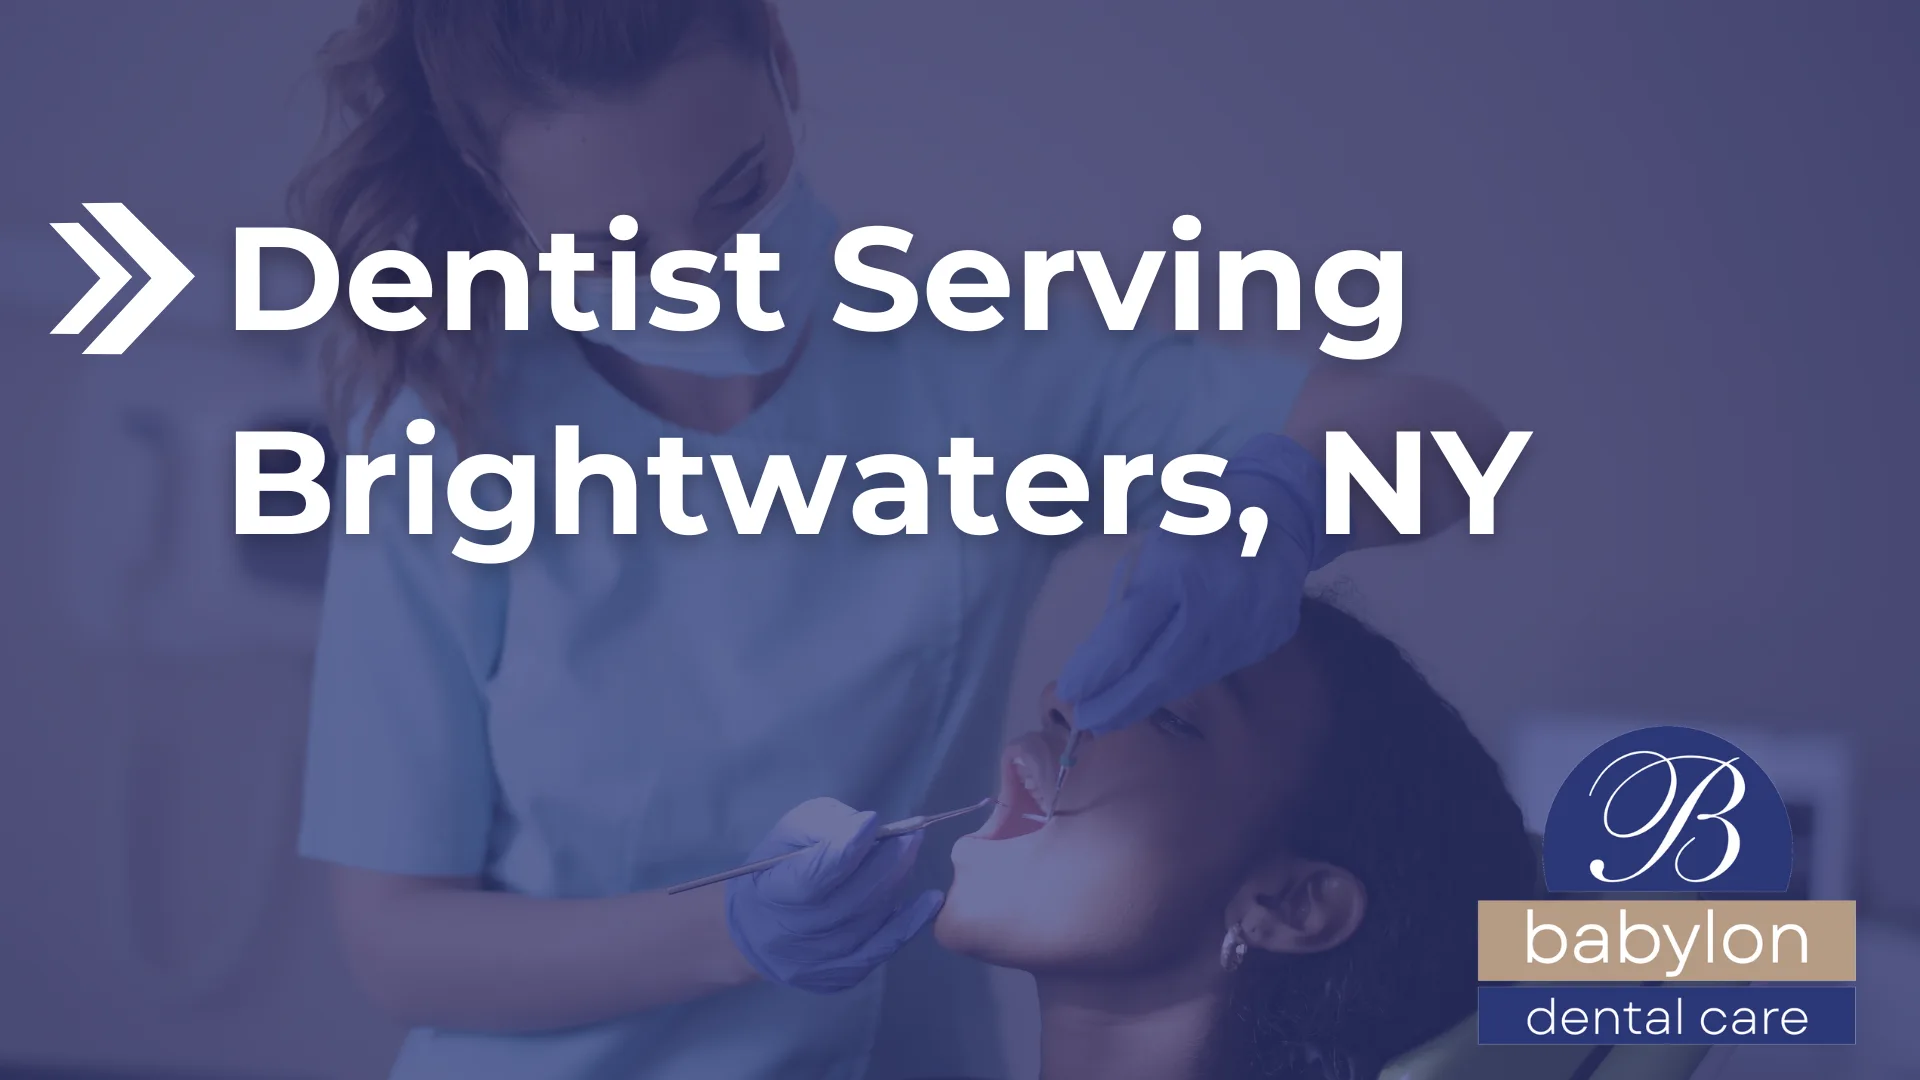 Dentist Serving Brightwaters, NY Image - new logo